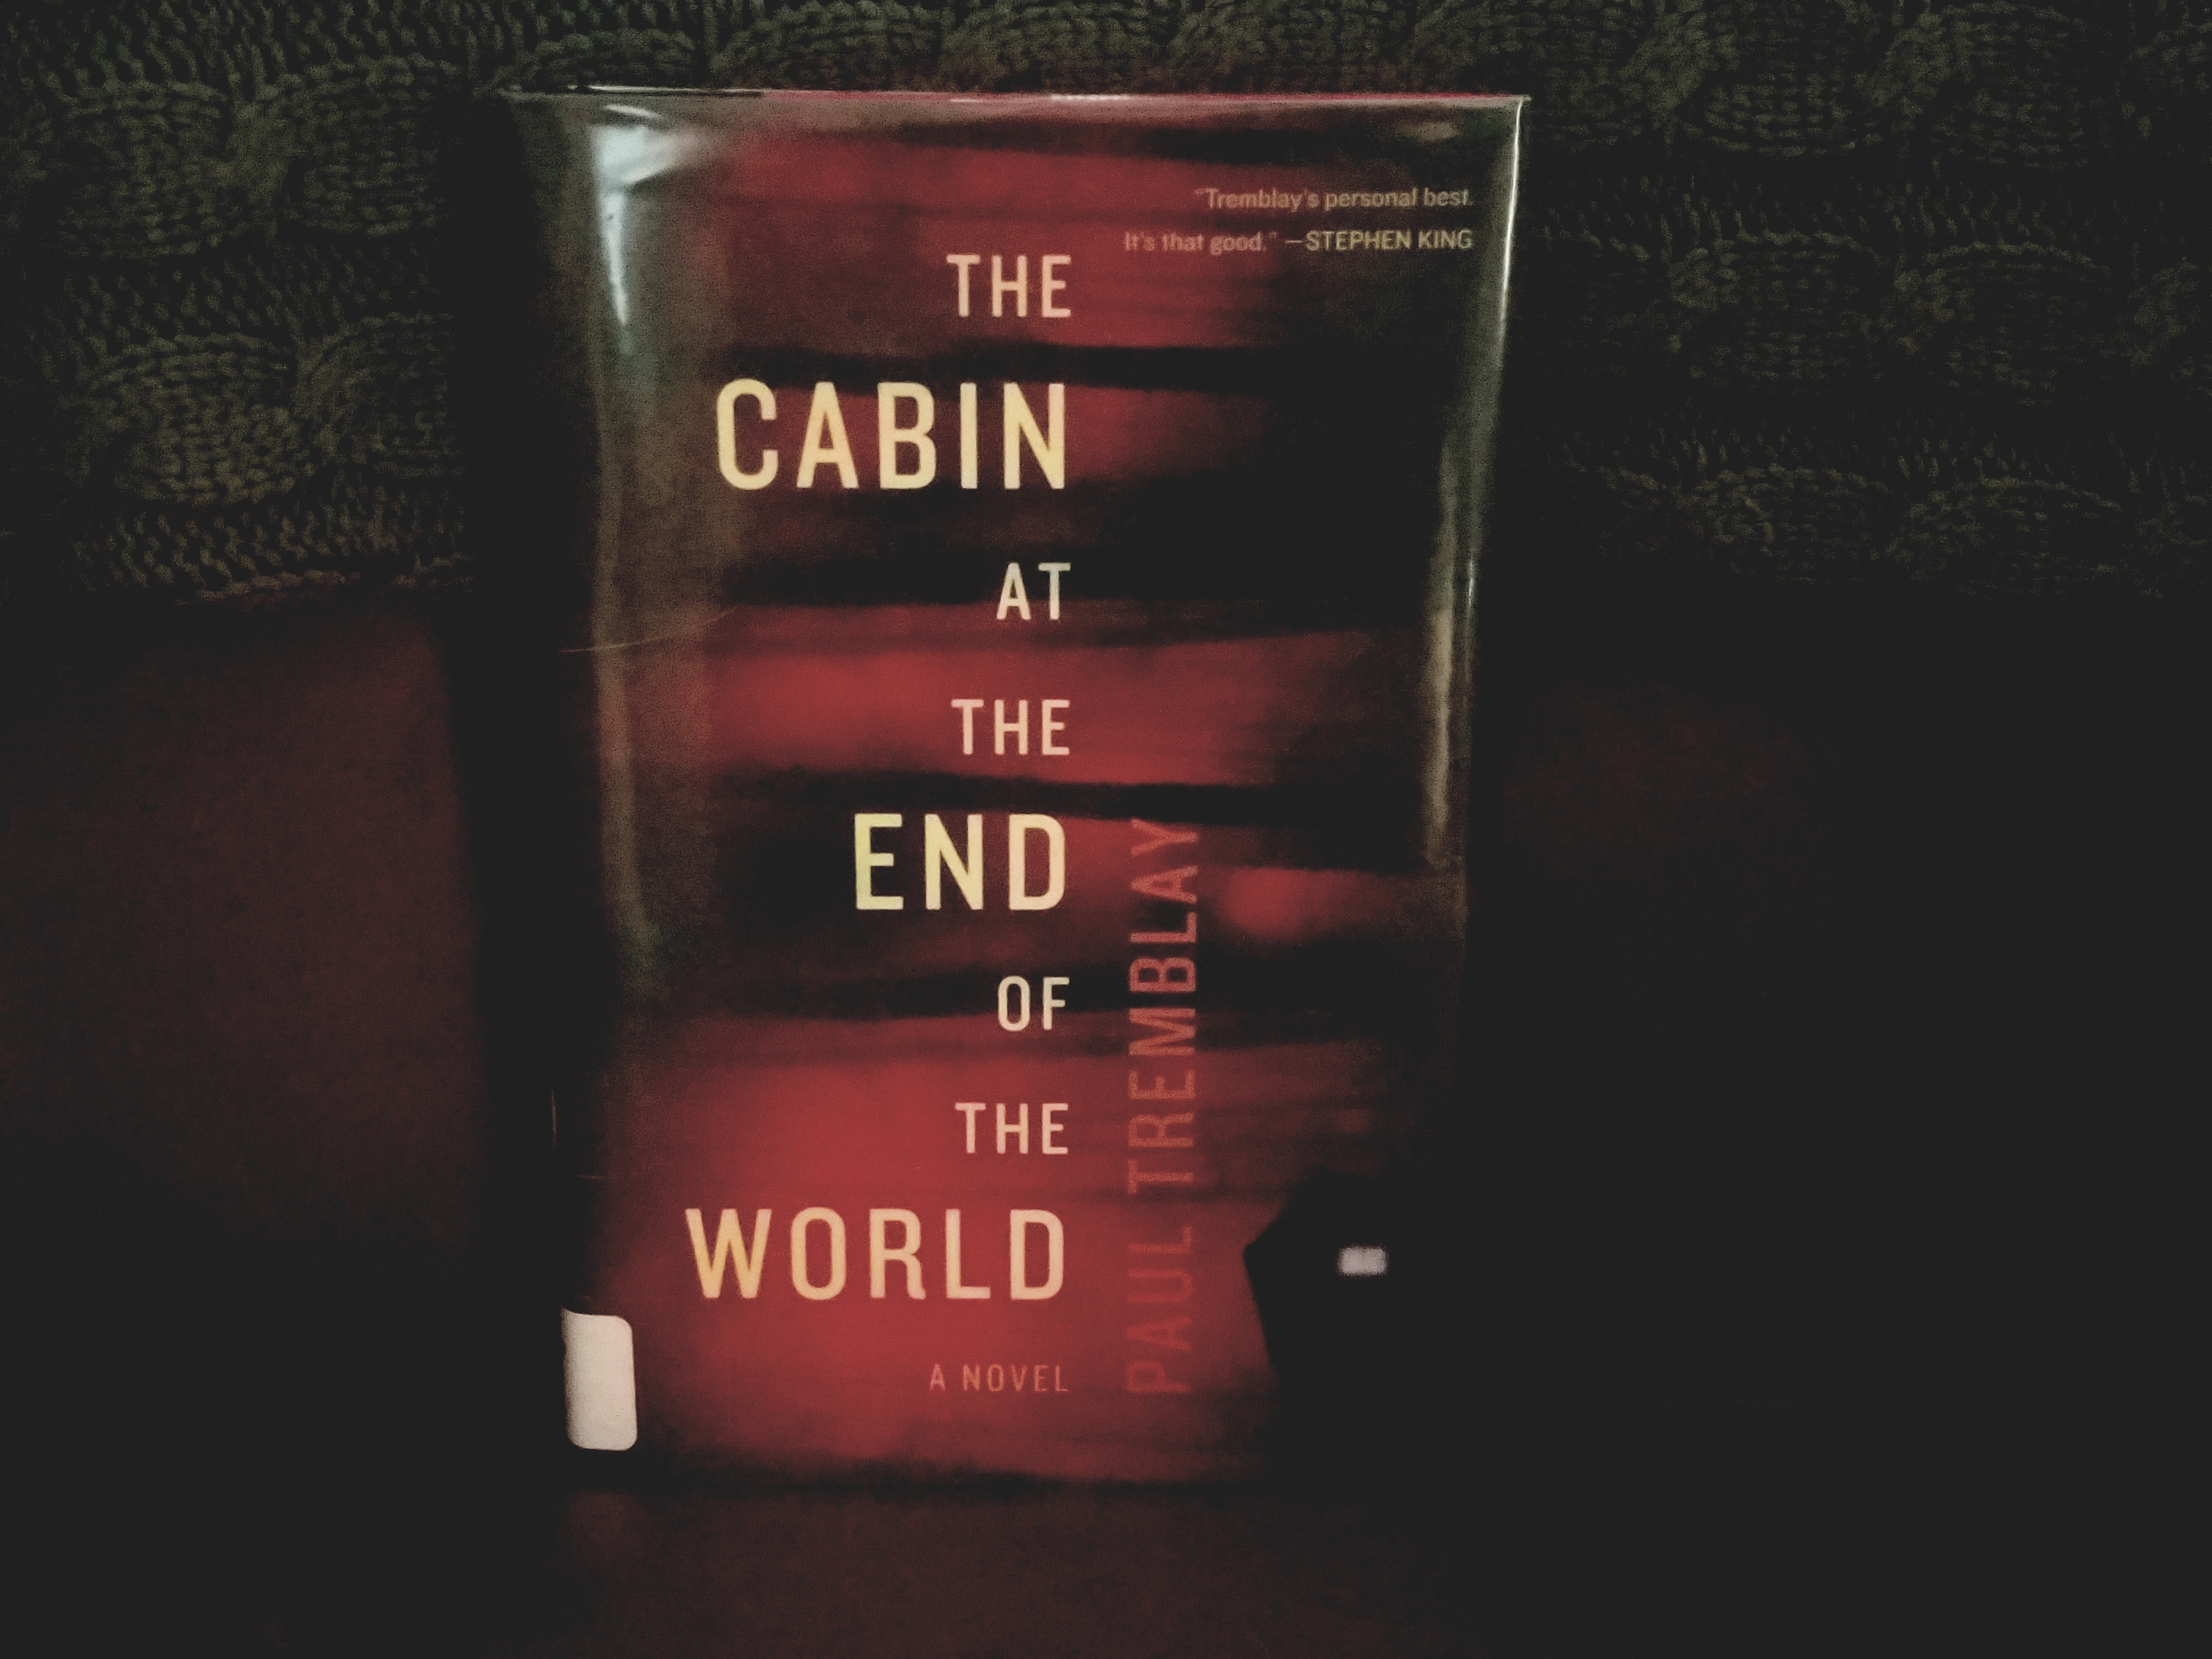 Book Review of THE CABIN AT THE END OF THE WORLD